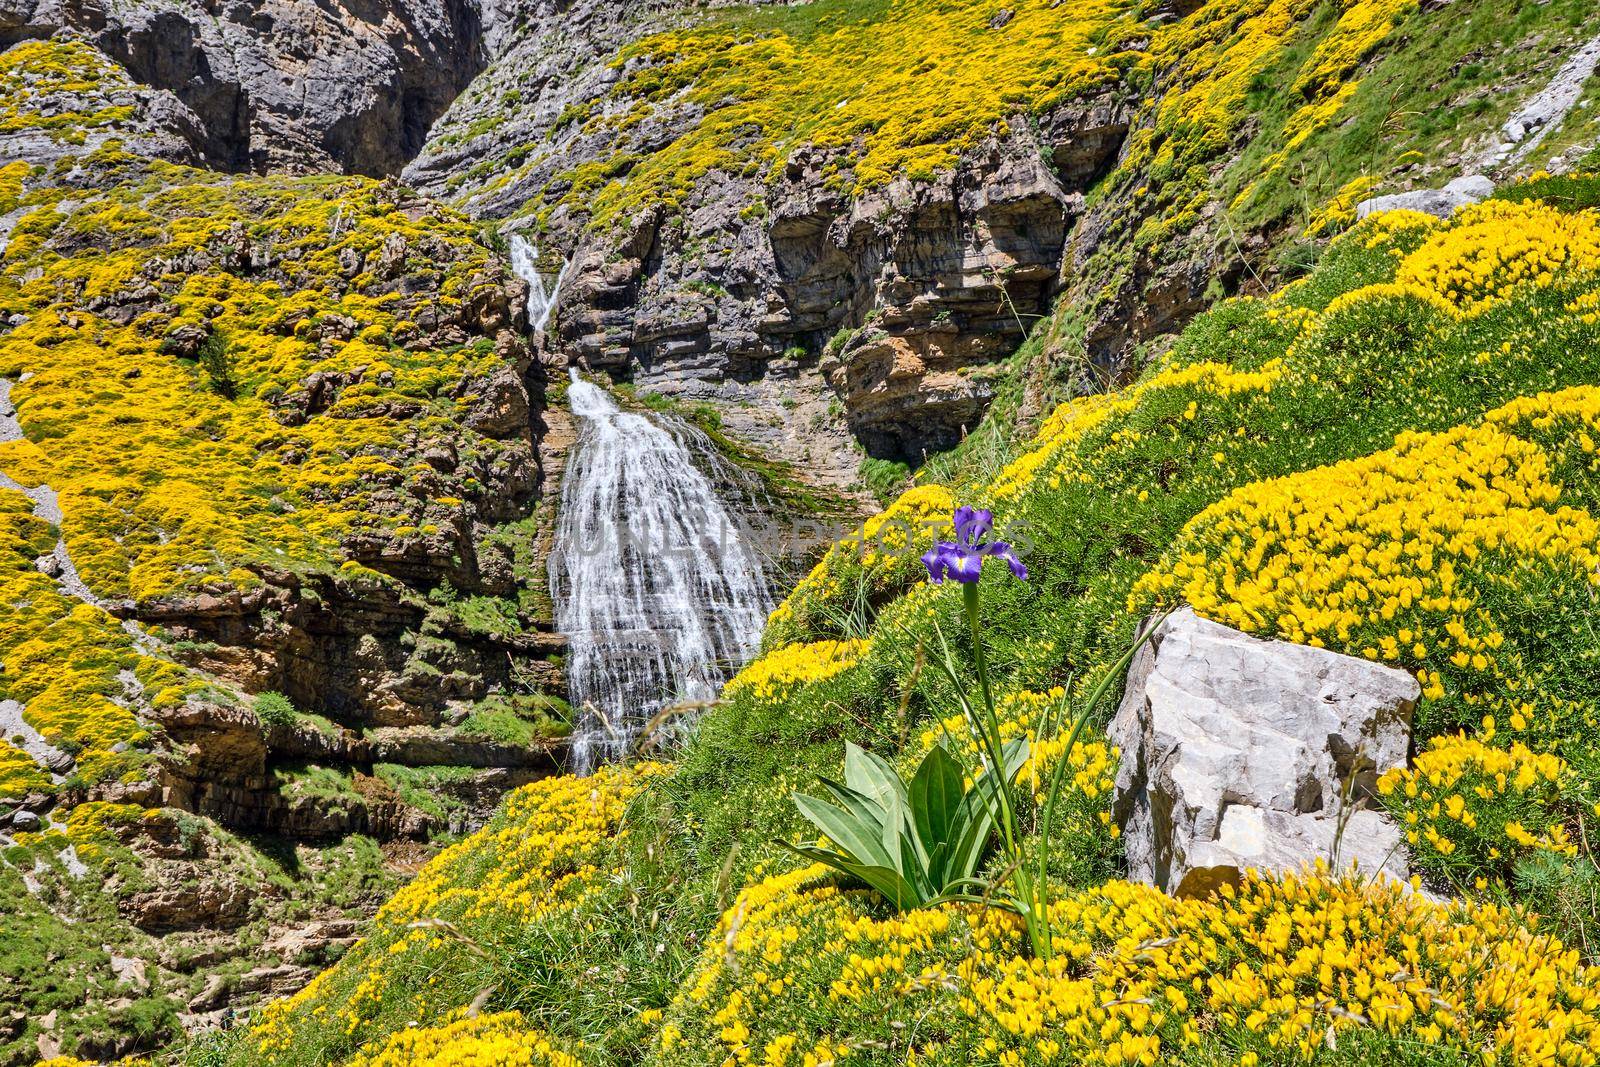 The Cola de Caballo waterfall in the beautiful Ordesa Valley with flowering yellow gorse